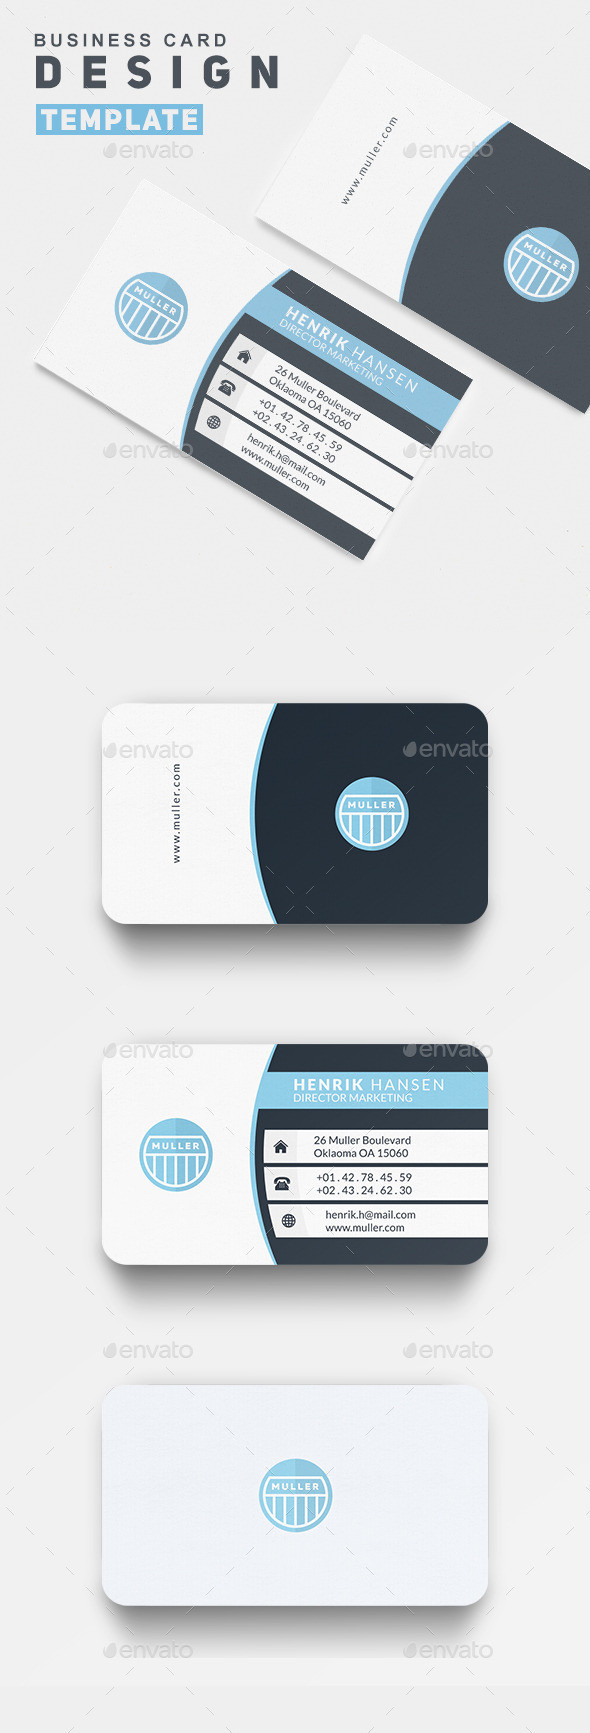 02 corporate business card preview 